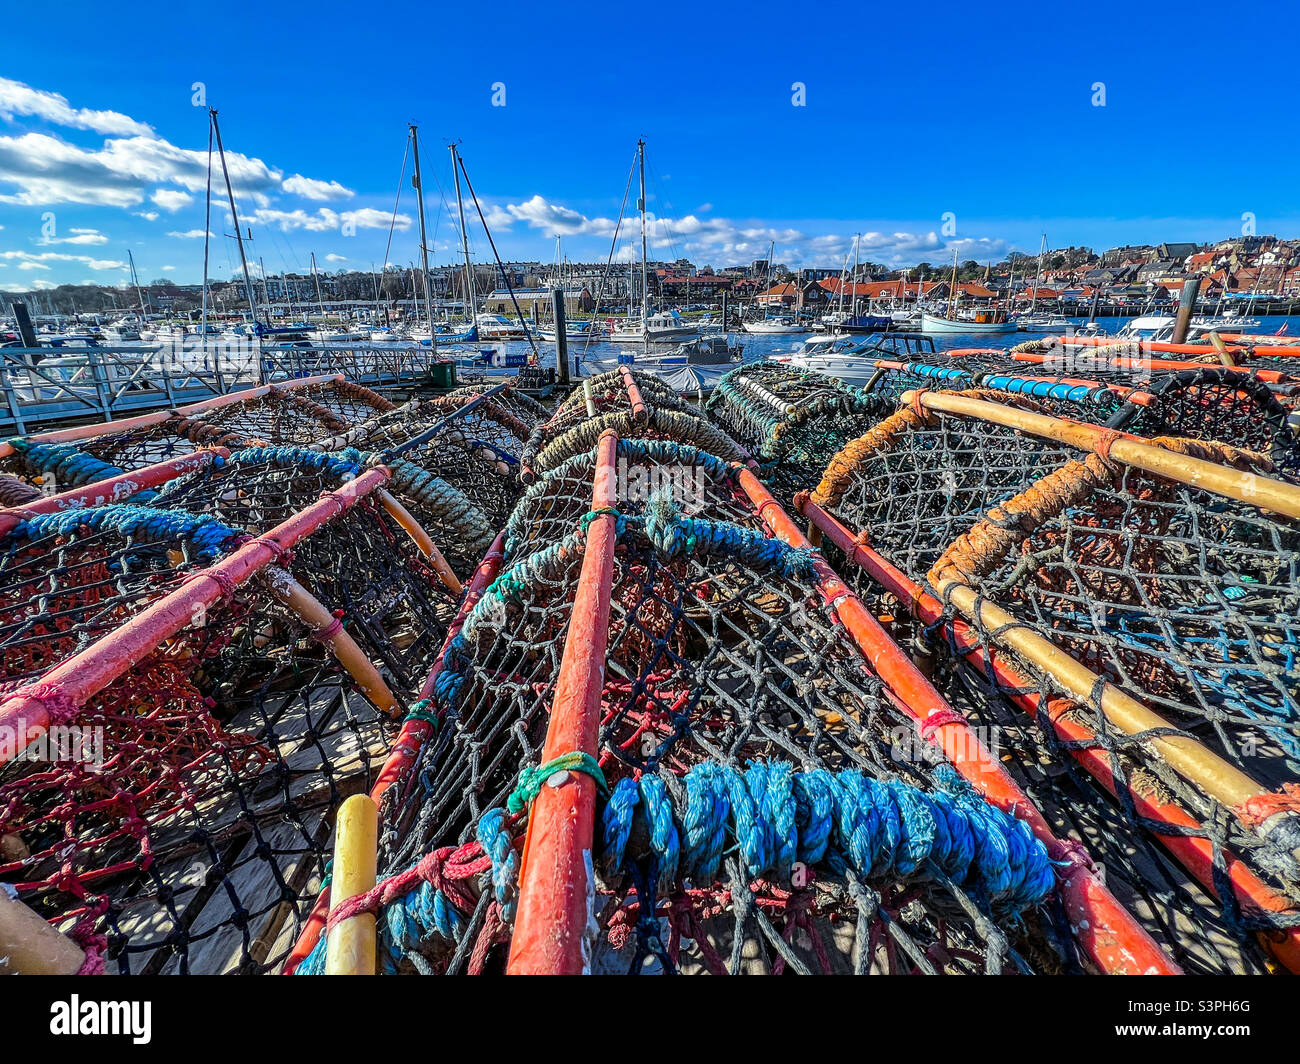 Lobster pots stacked on Whitby quayside on harbour Stock Photo